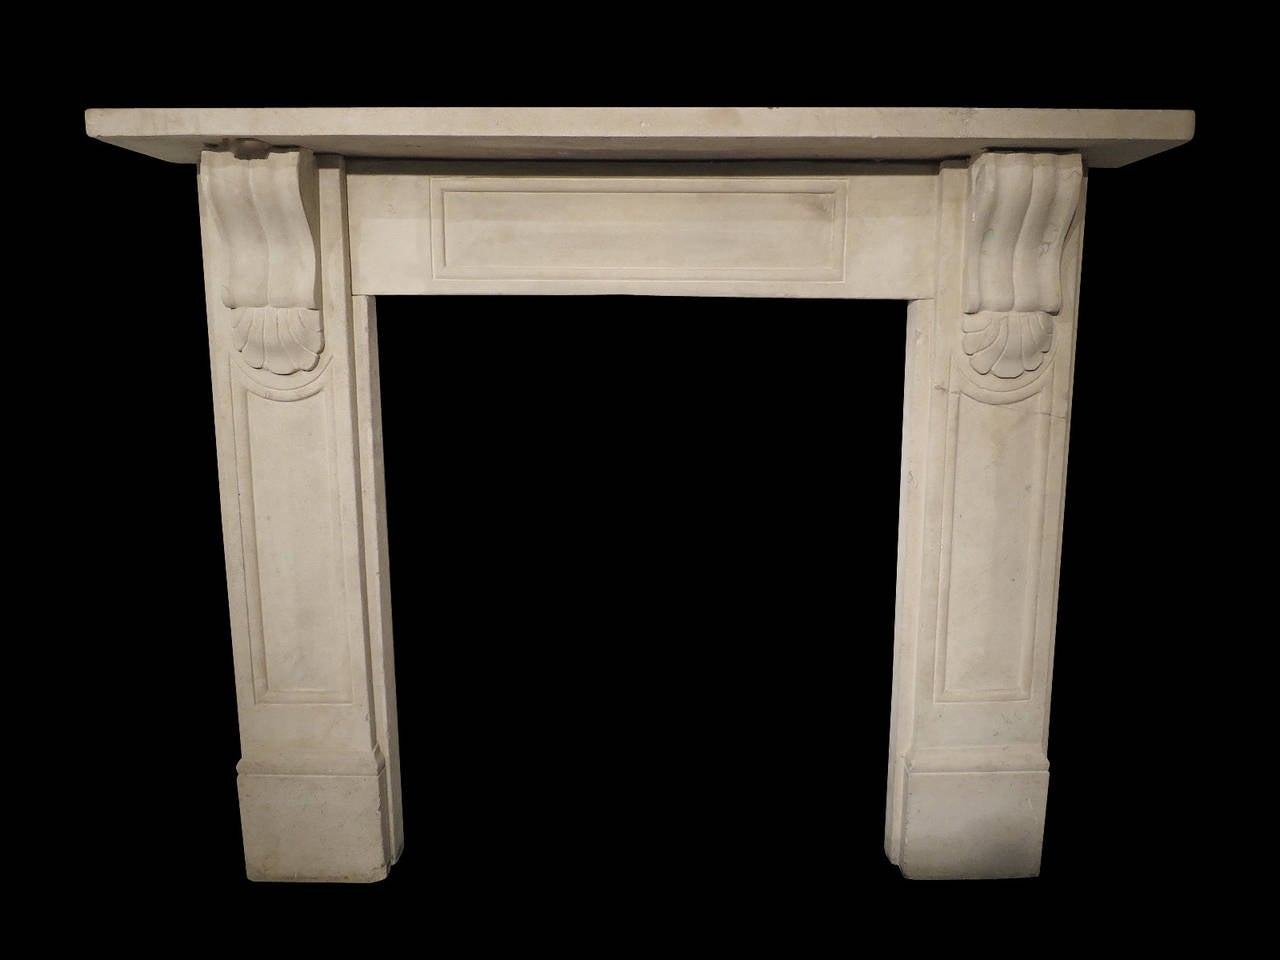 An English limestone fireplace, with raised panelled jambs and matching frieze. Carved corbels with unusual shells and plain mantel. Mid-19th century Victorian stone surround.